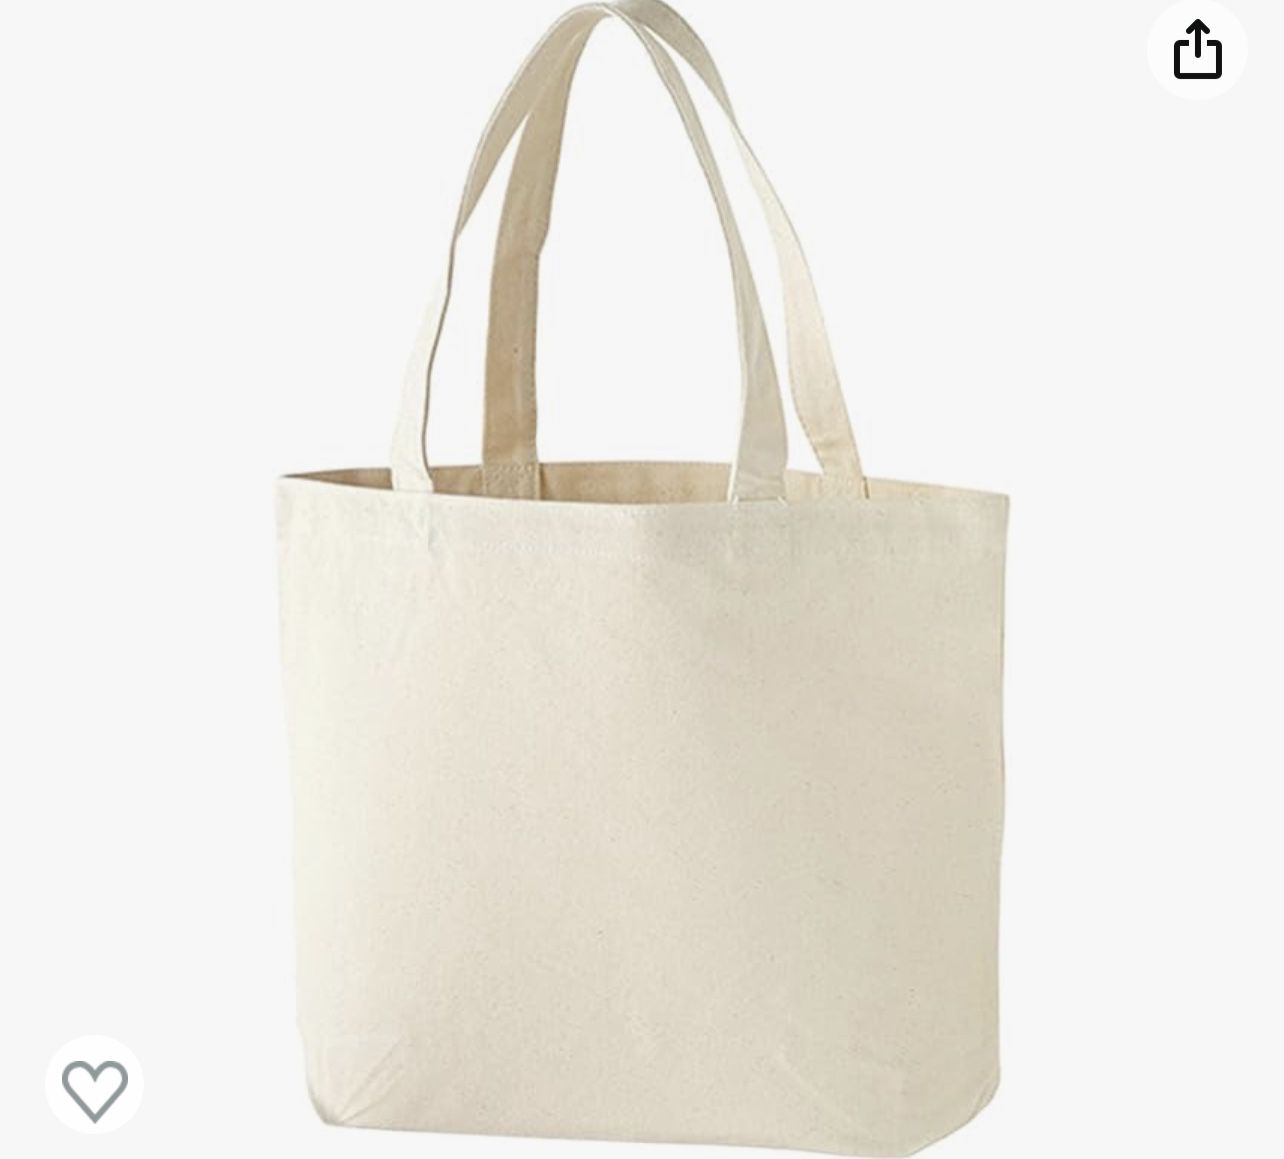 Brandnew Canvas Tote Bag Grocery Bag Reusable Multi-Purpose Cloth Bags with Zipper and Interior Pocket for DIY Gift Bags